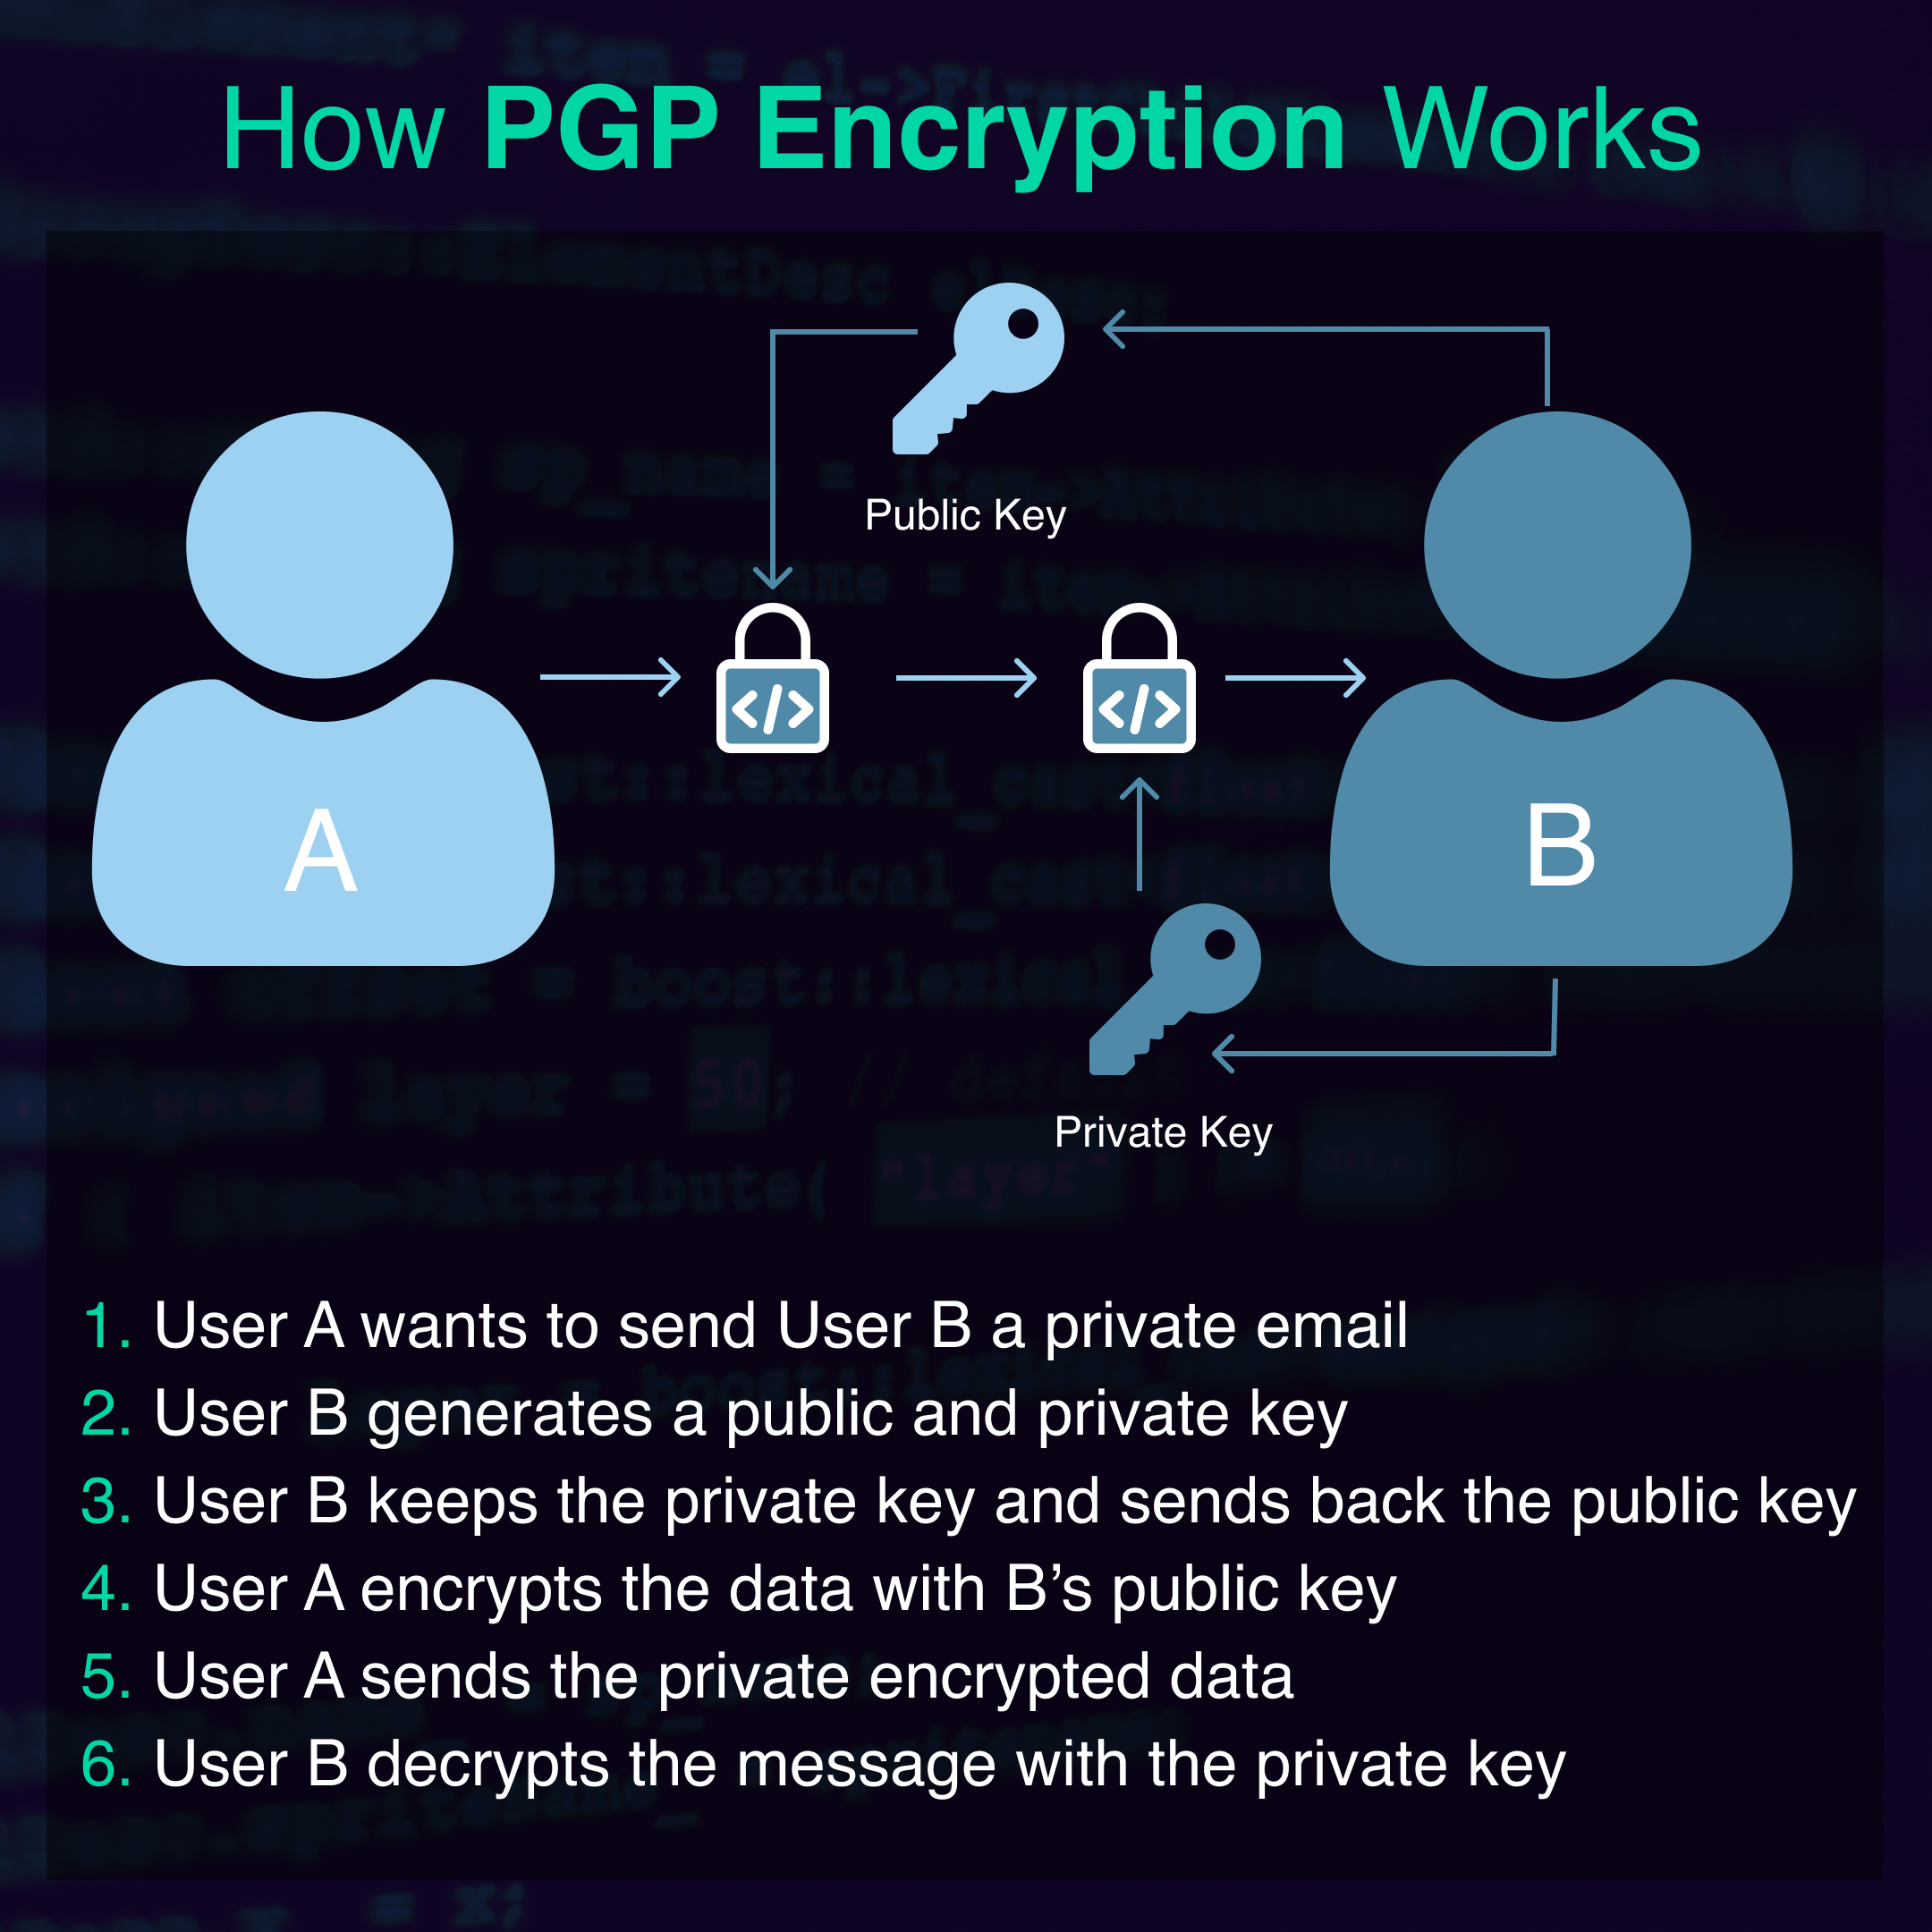 How PGP Encryption Works?